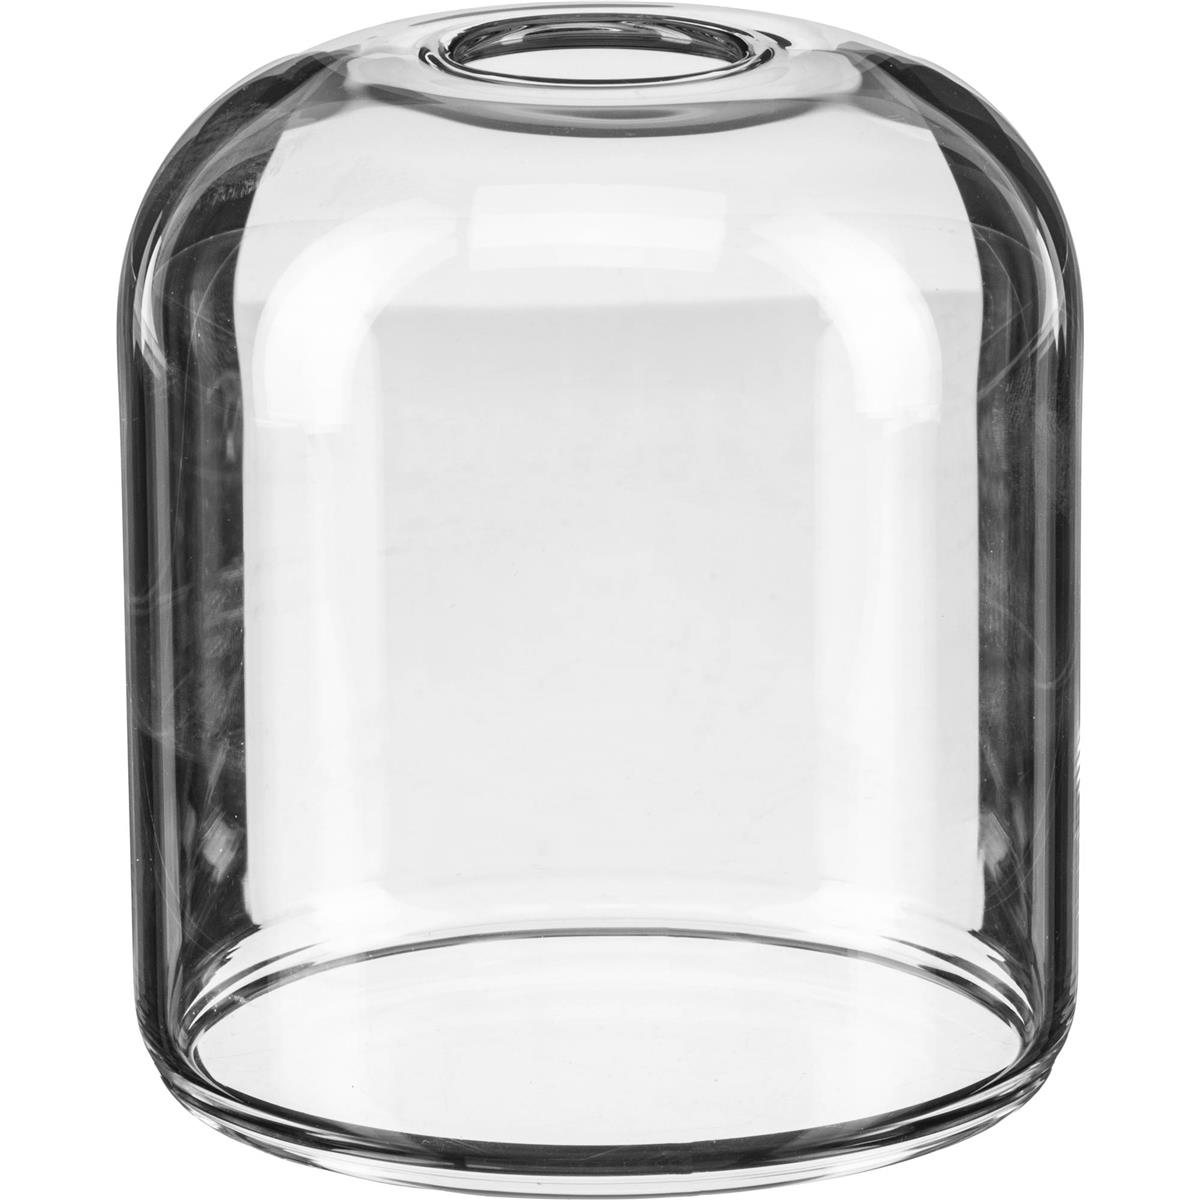 Image of Hensel Clear Glass Dome for Integra Series Monolights